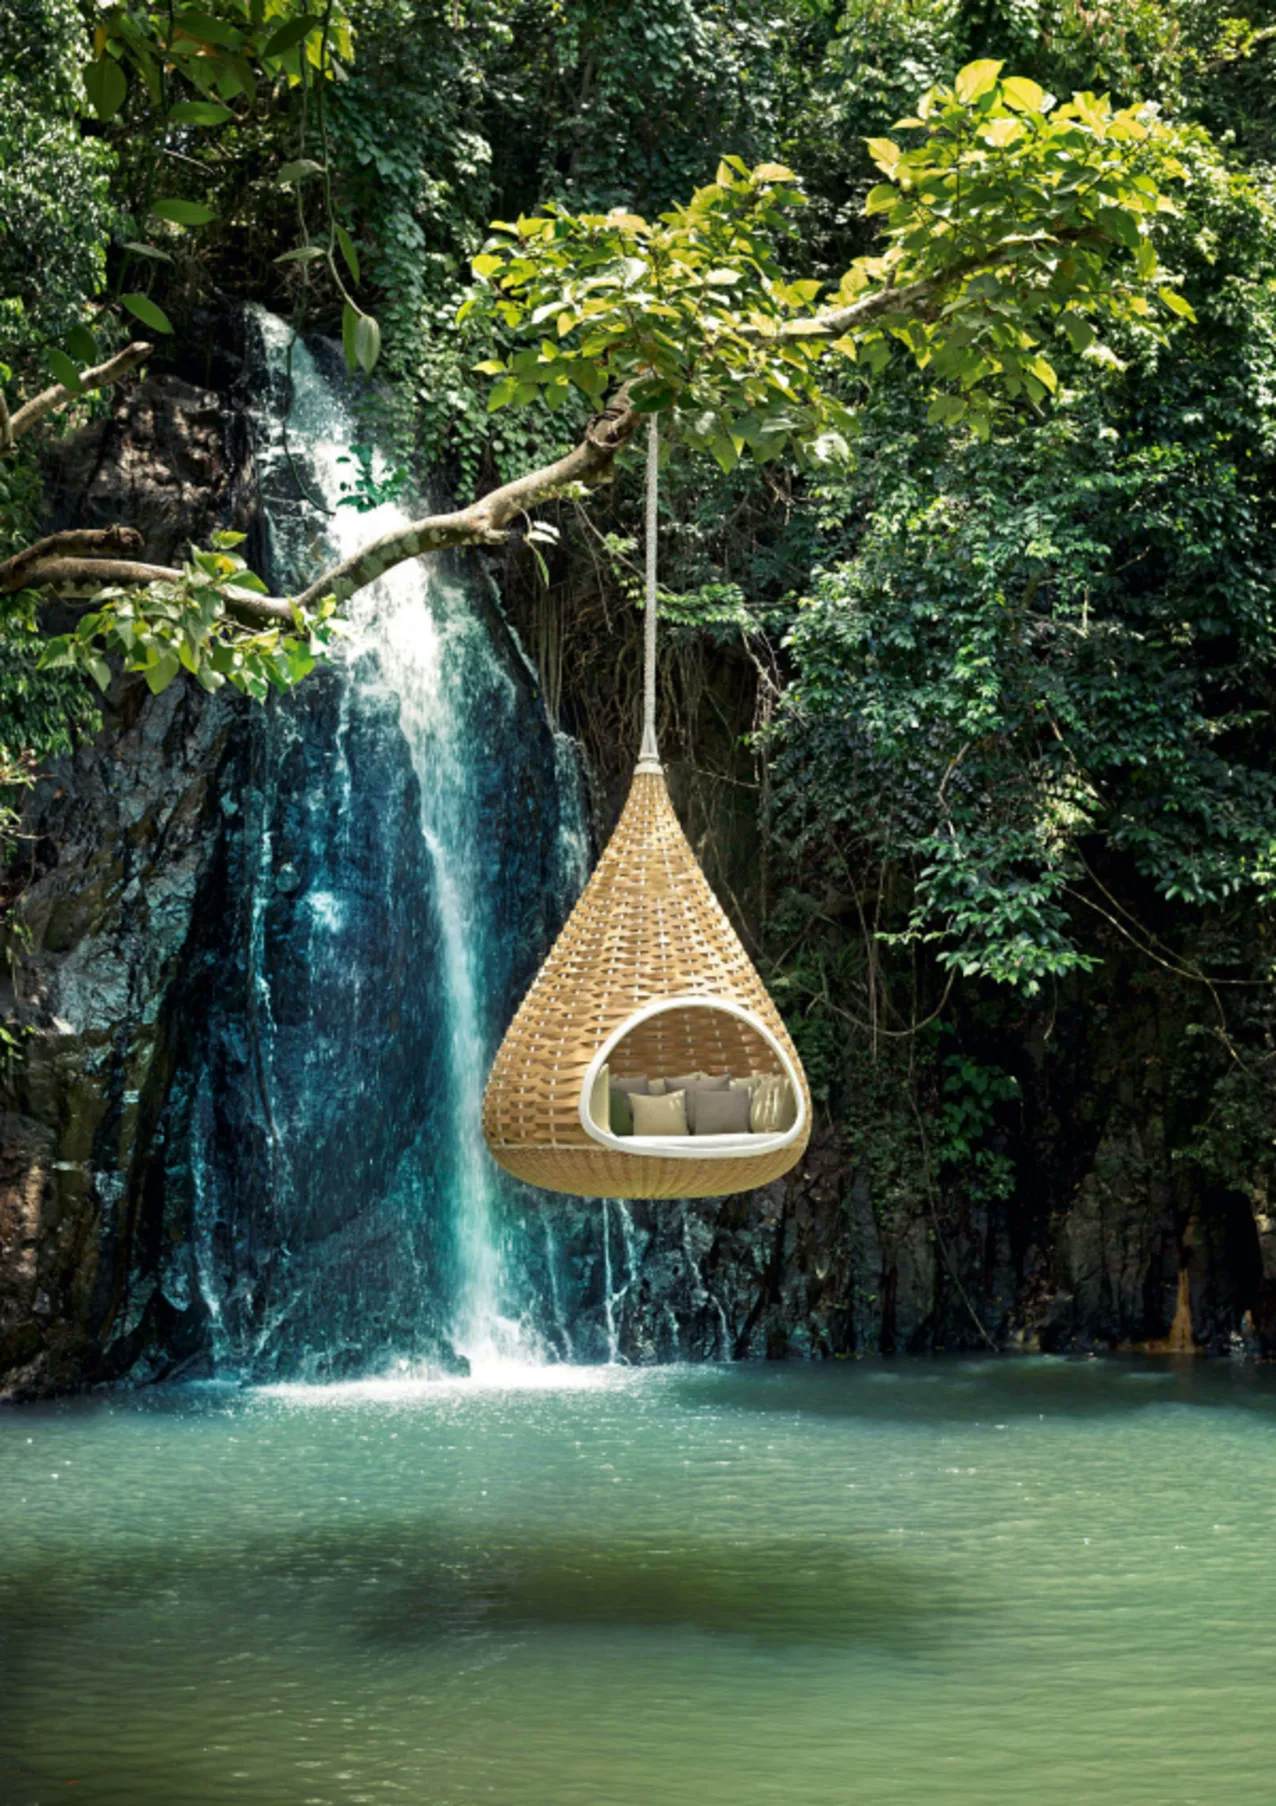 Chasing waterfalls: NESTREST Hanging Lounger with Natural fiber (Photo courtesy of DEDON)